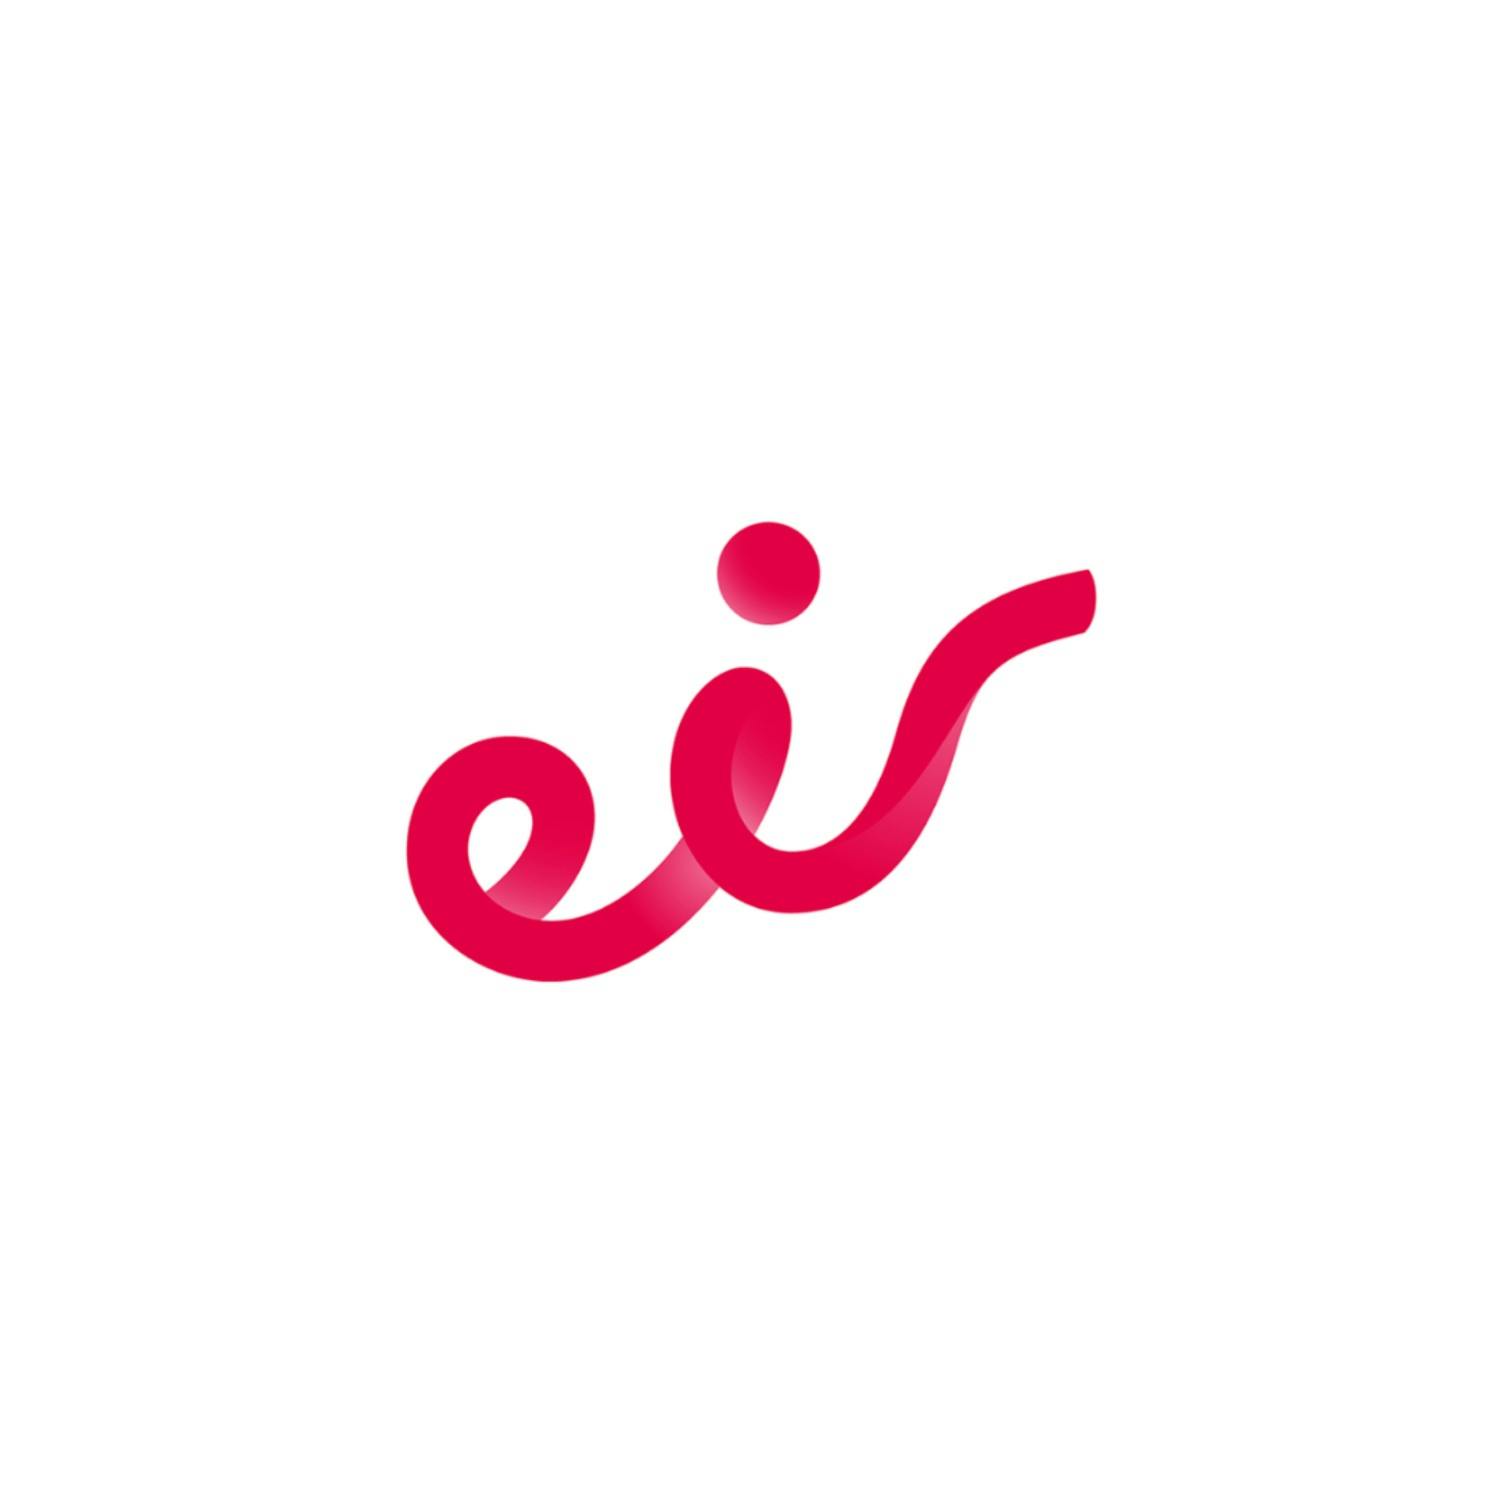 Personal Finance: EIR Staff Told Not To Obey Law By Management